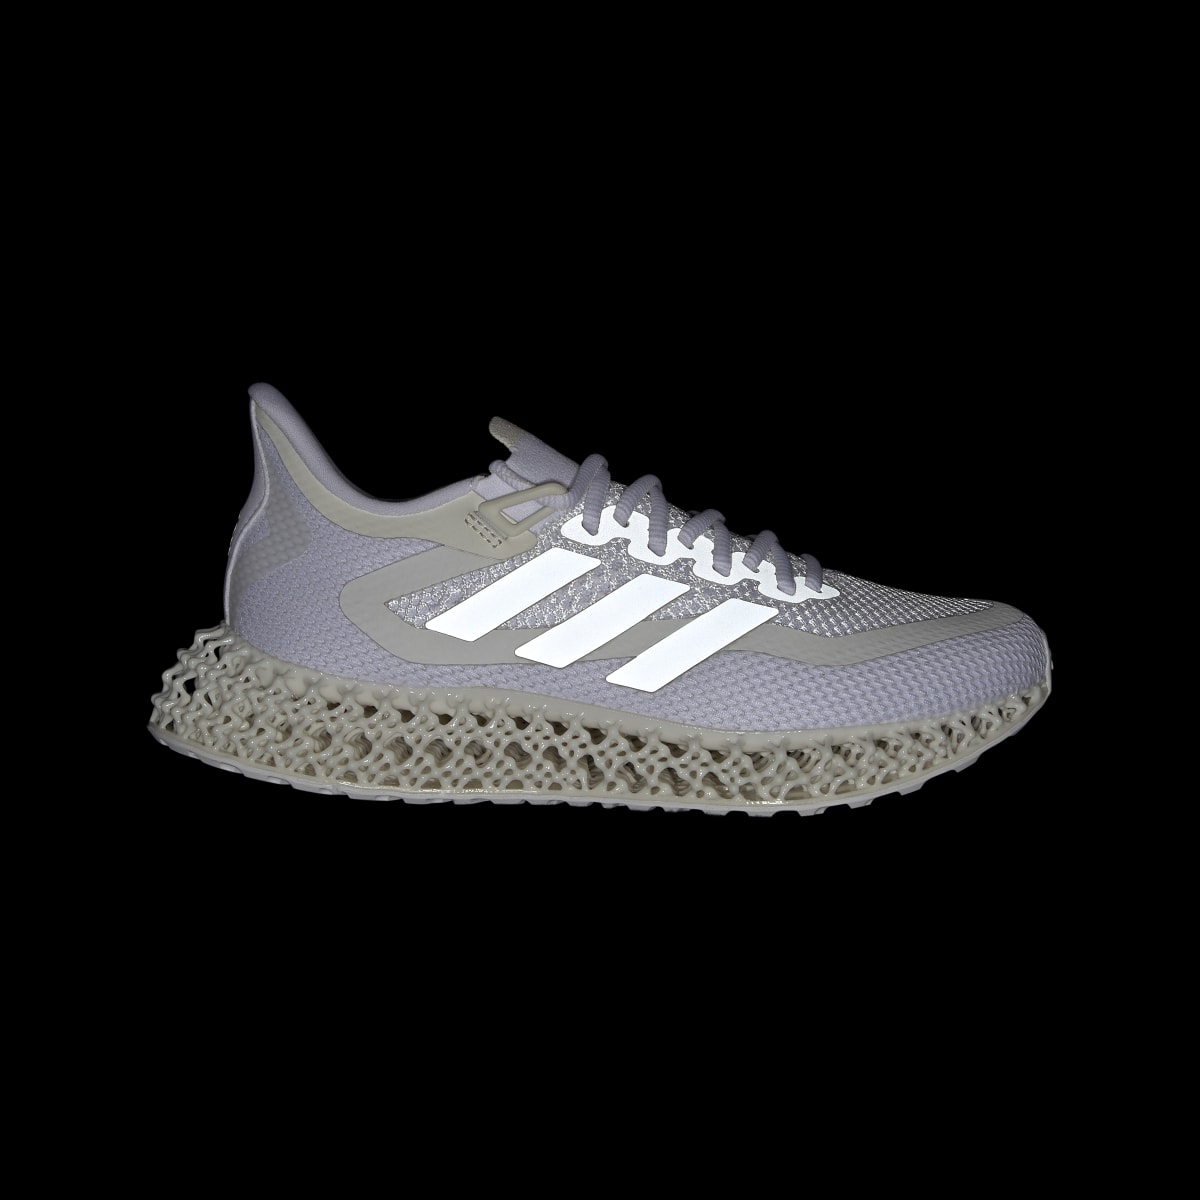 Adidas 4DFWD 2 Running Shoes. 5